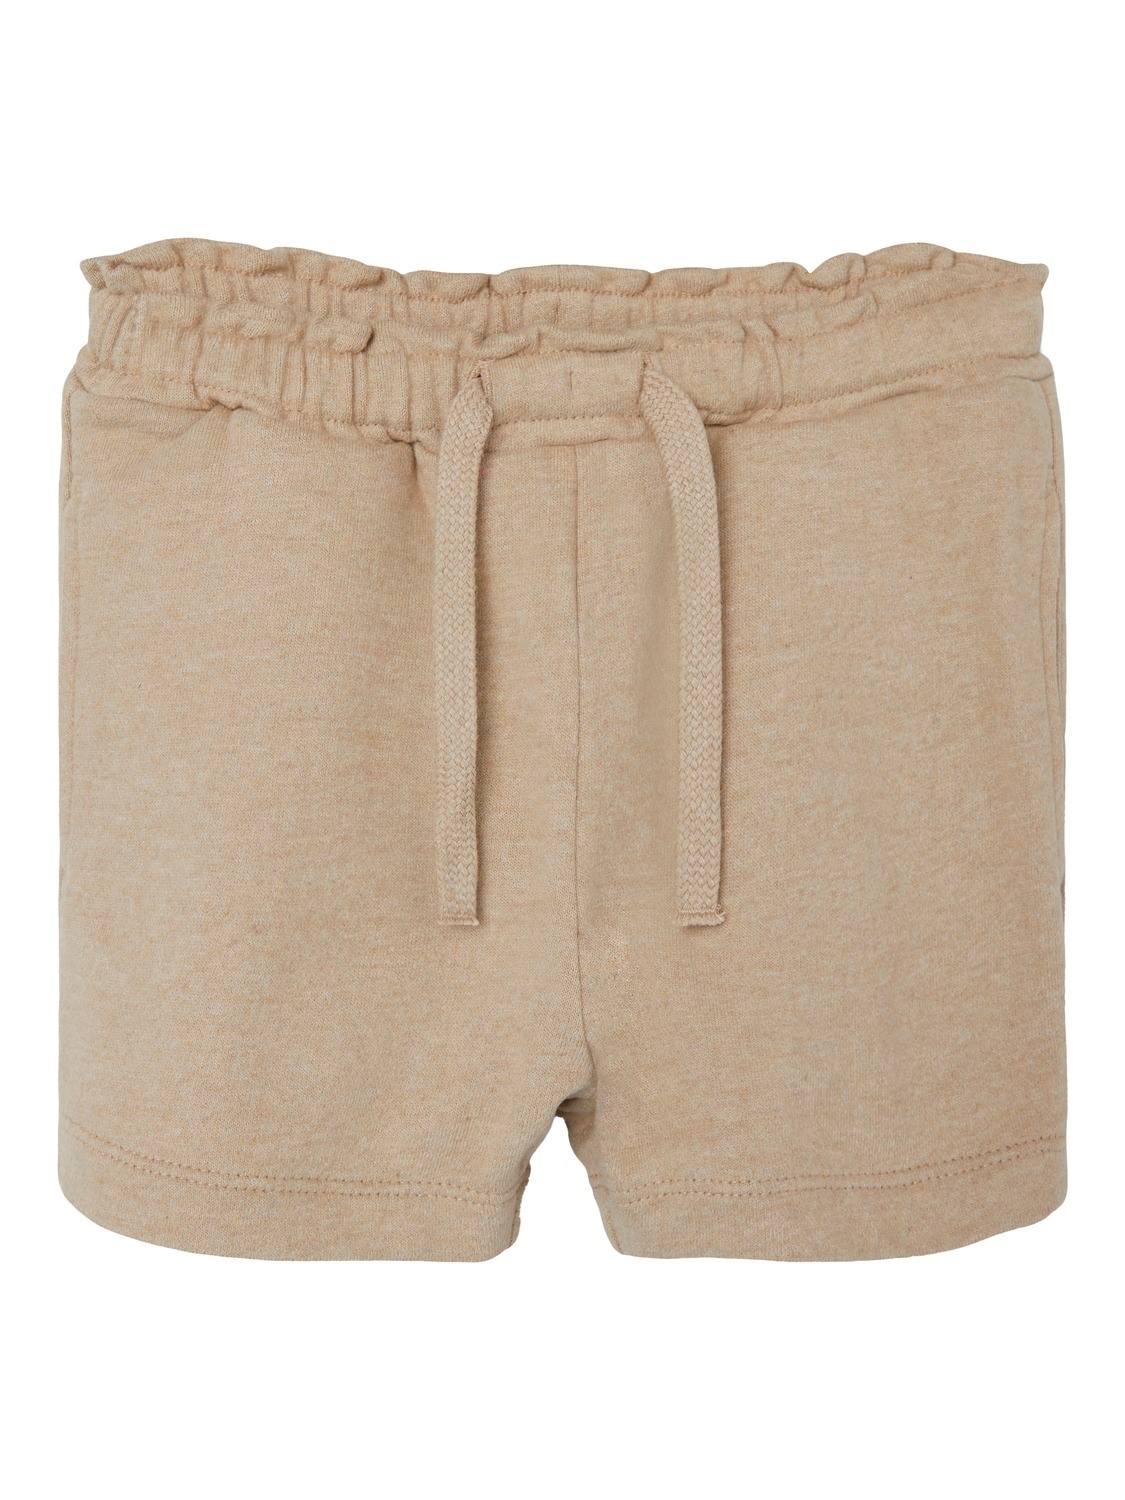 Lil Atelier - Daylin Loose Sweat shorts Croissant-1